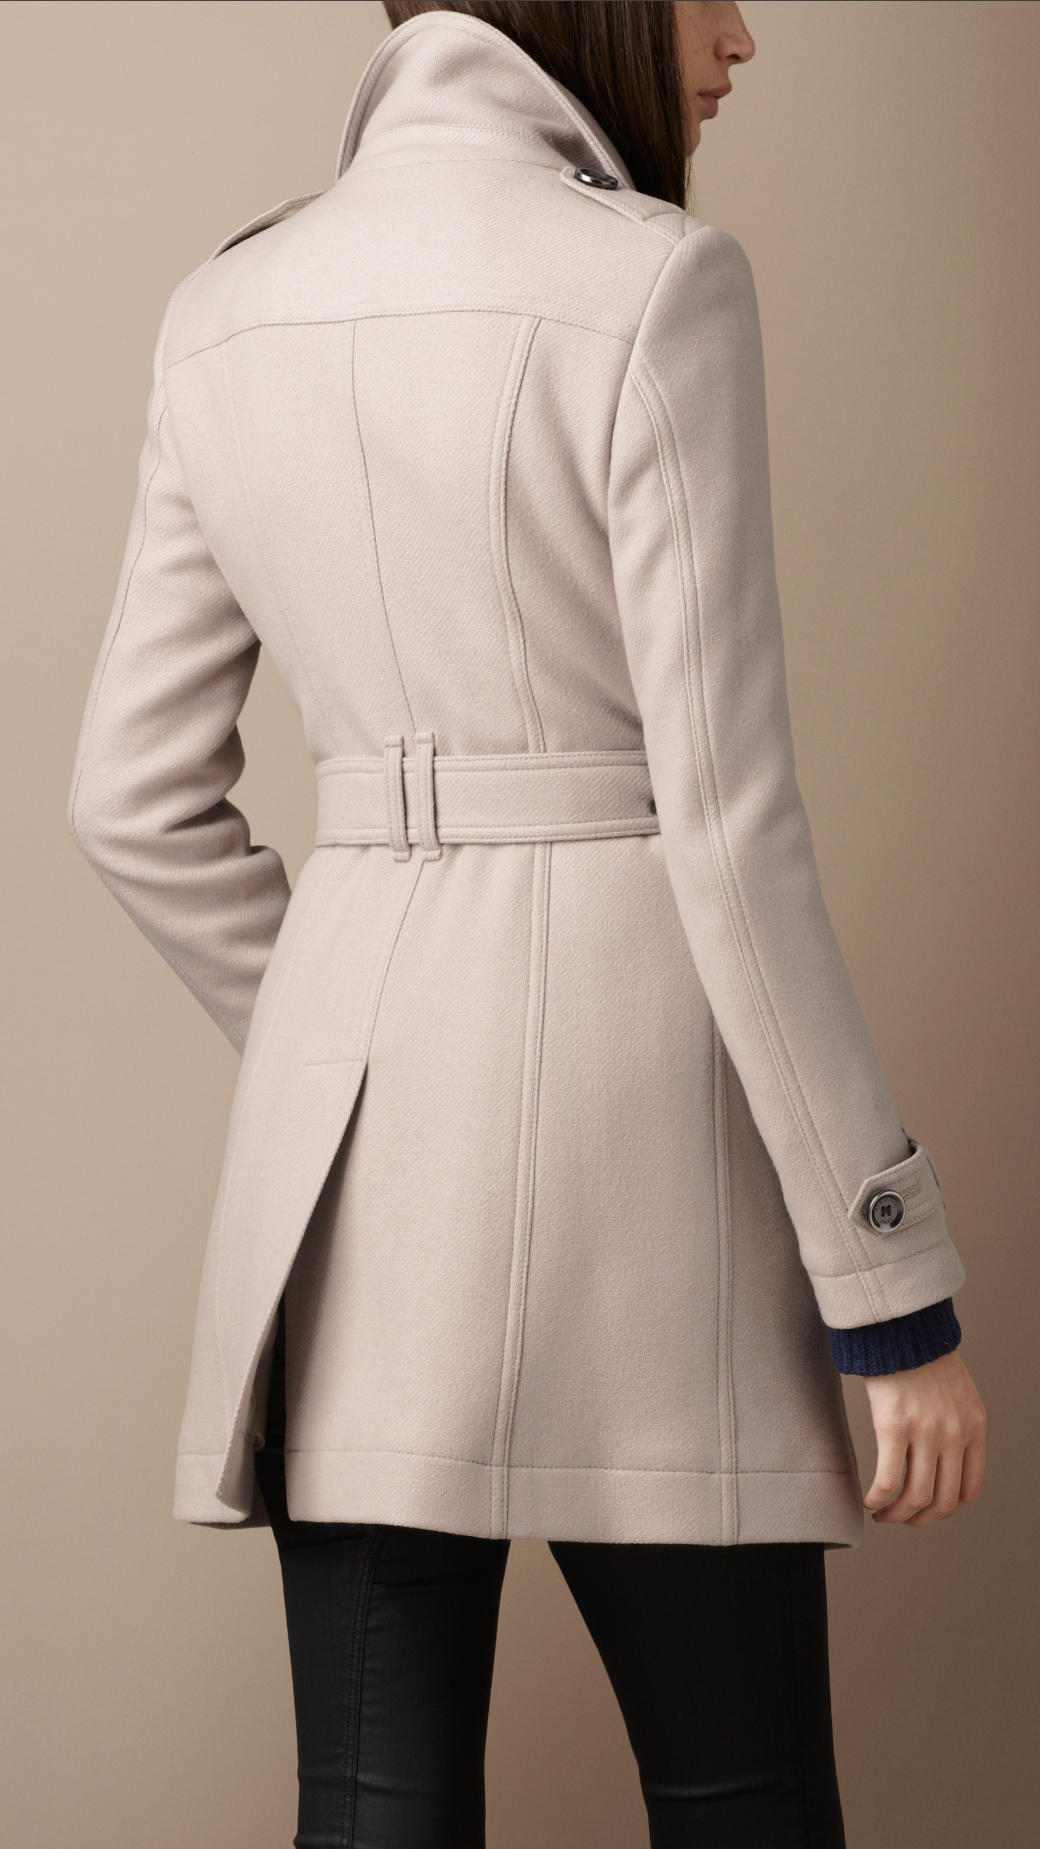 Burberry Brit Funnel Neck Wool Coat in Natural - Lyst